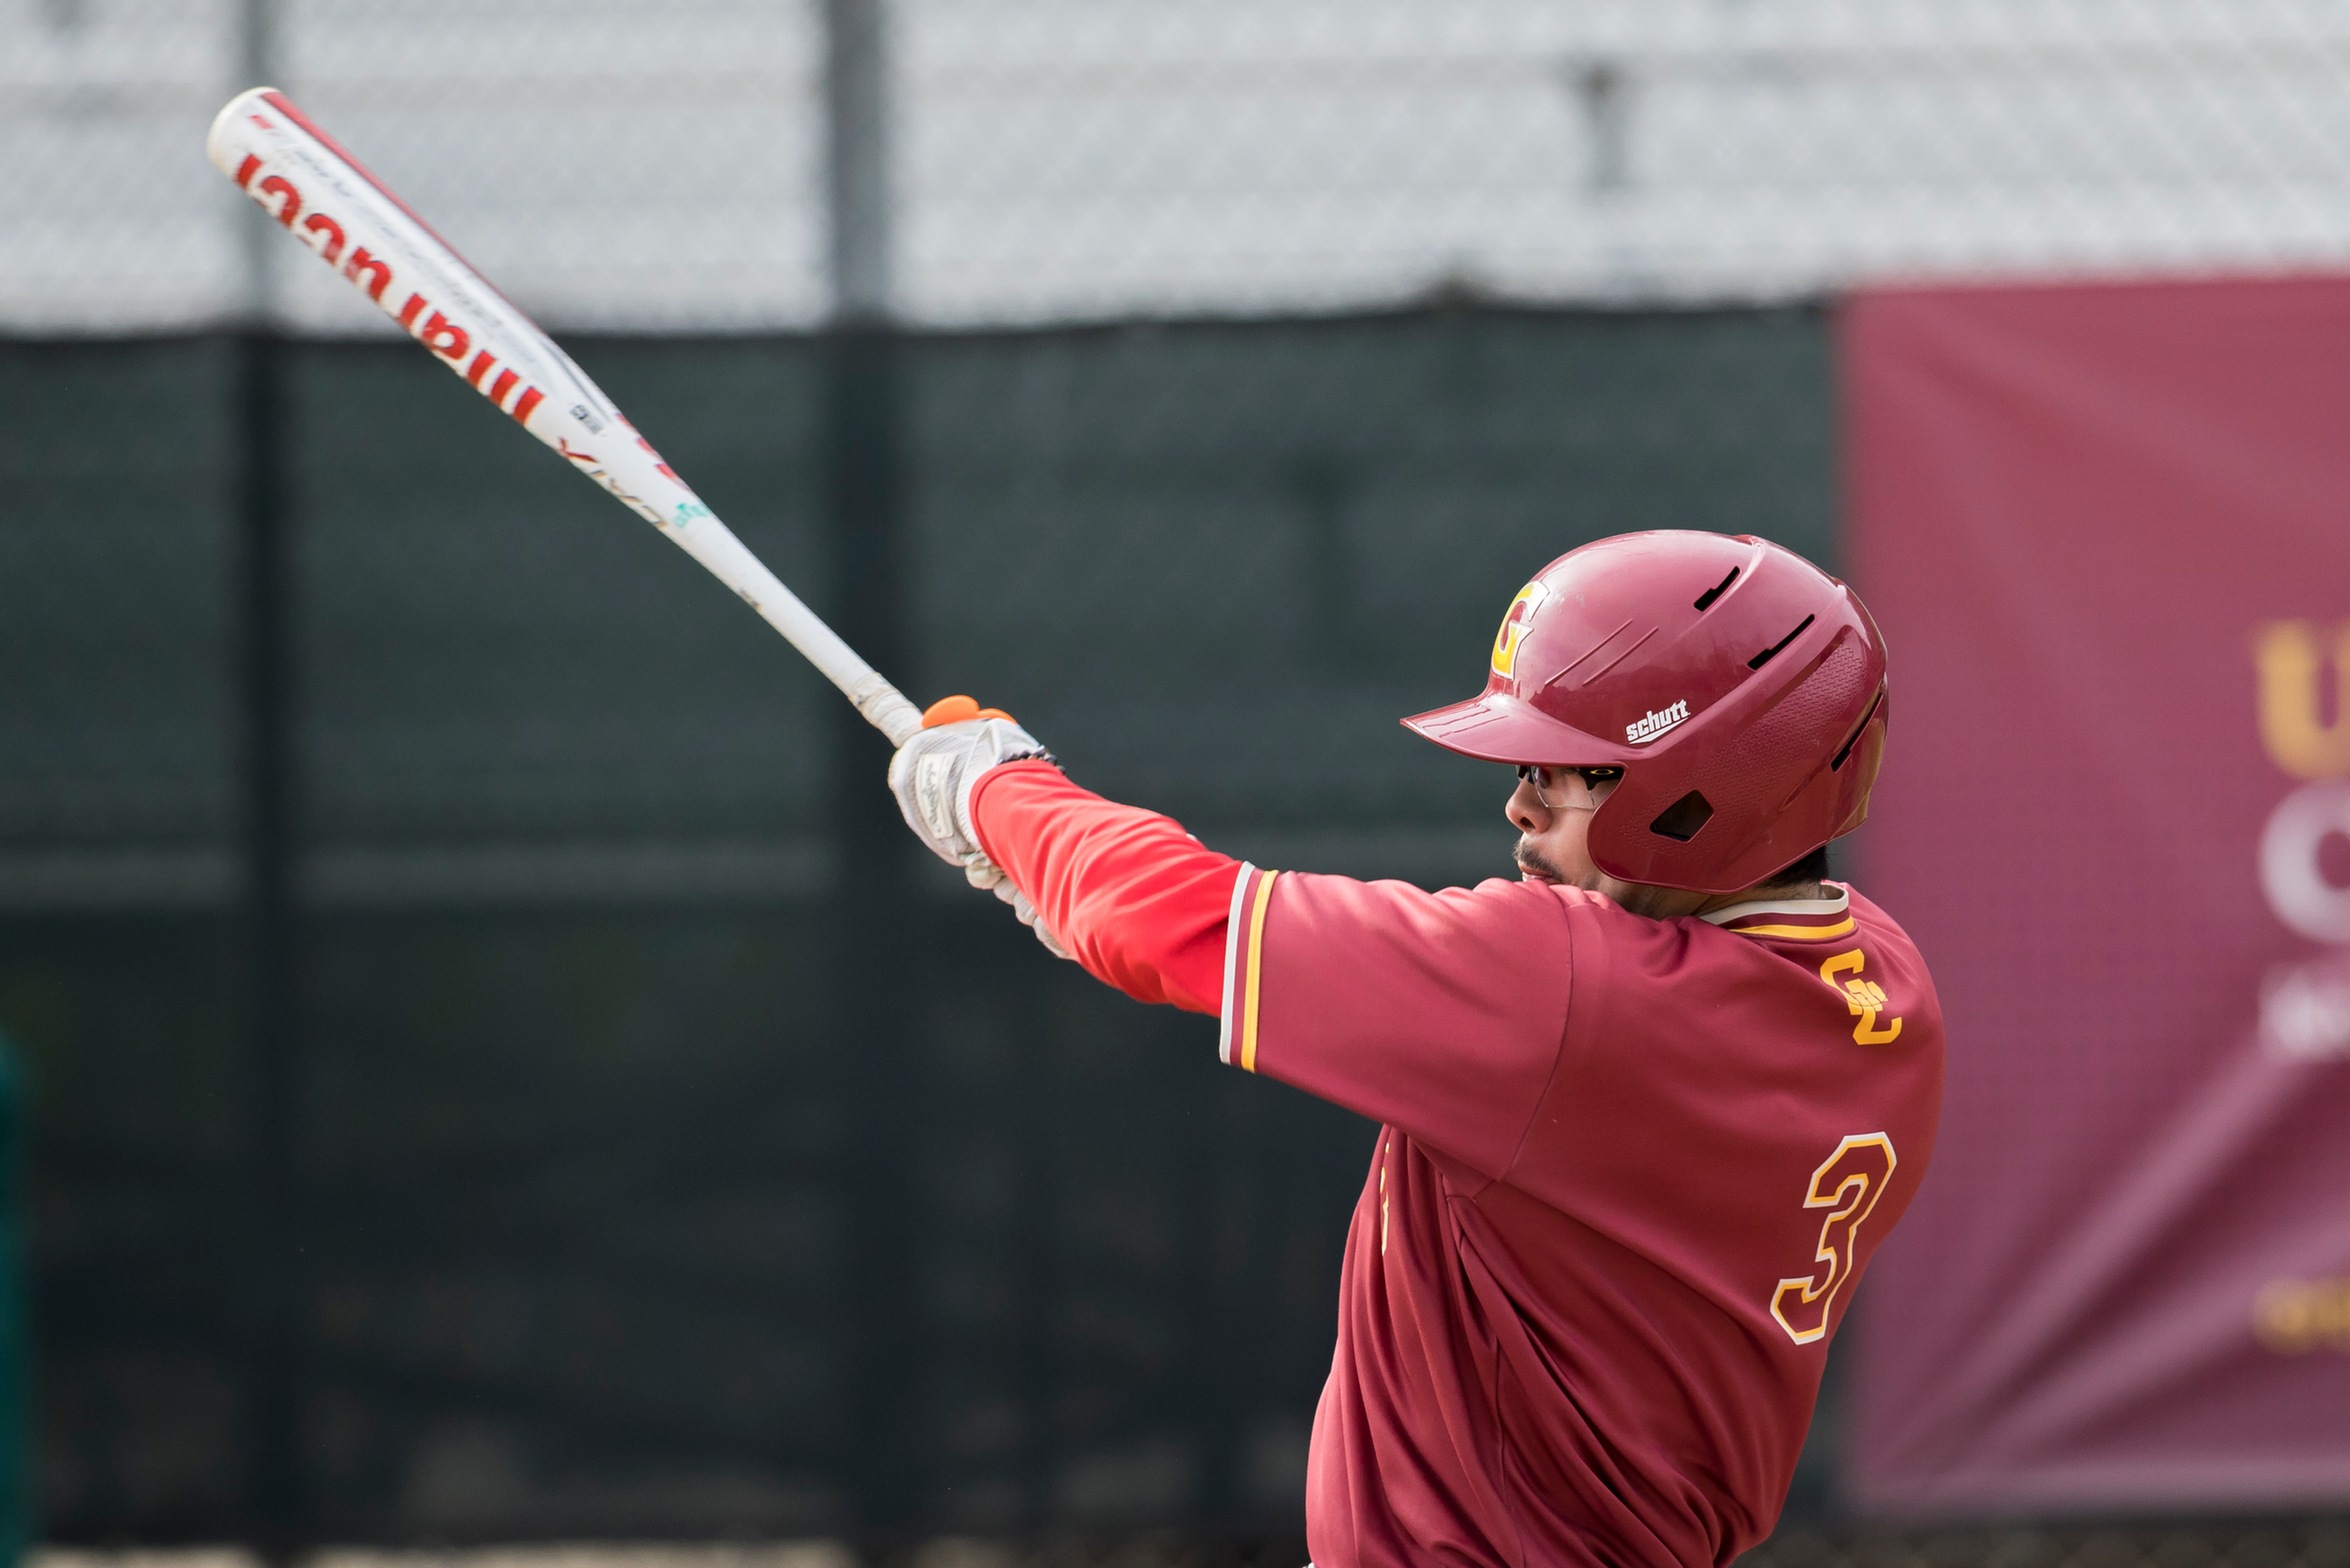 Glendale sweeps Oxnard 10-6 and 14-1 in doubleheader Feb. 22 to improve to 9-4